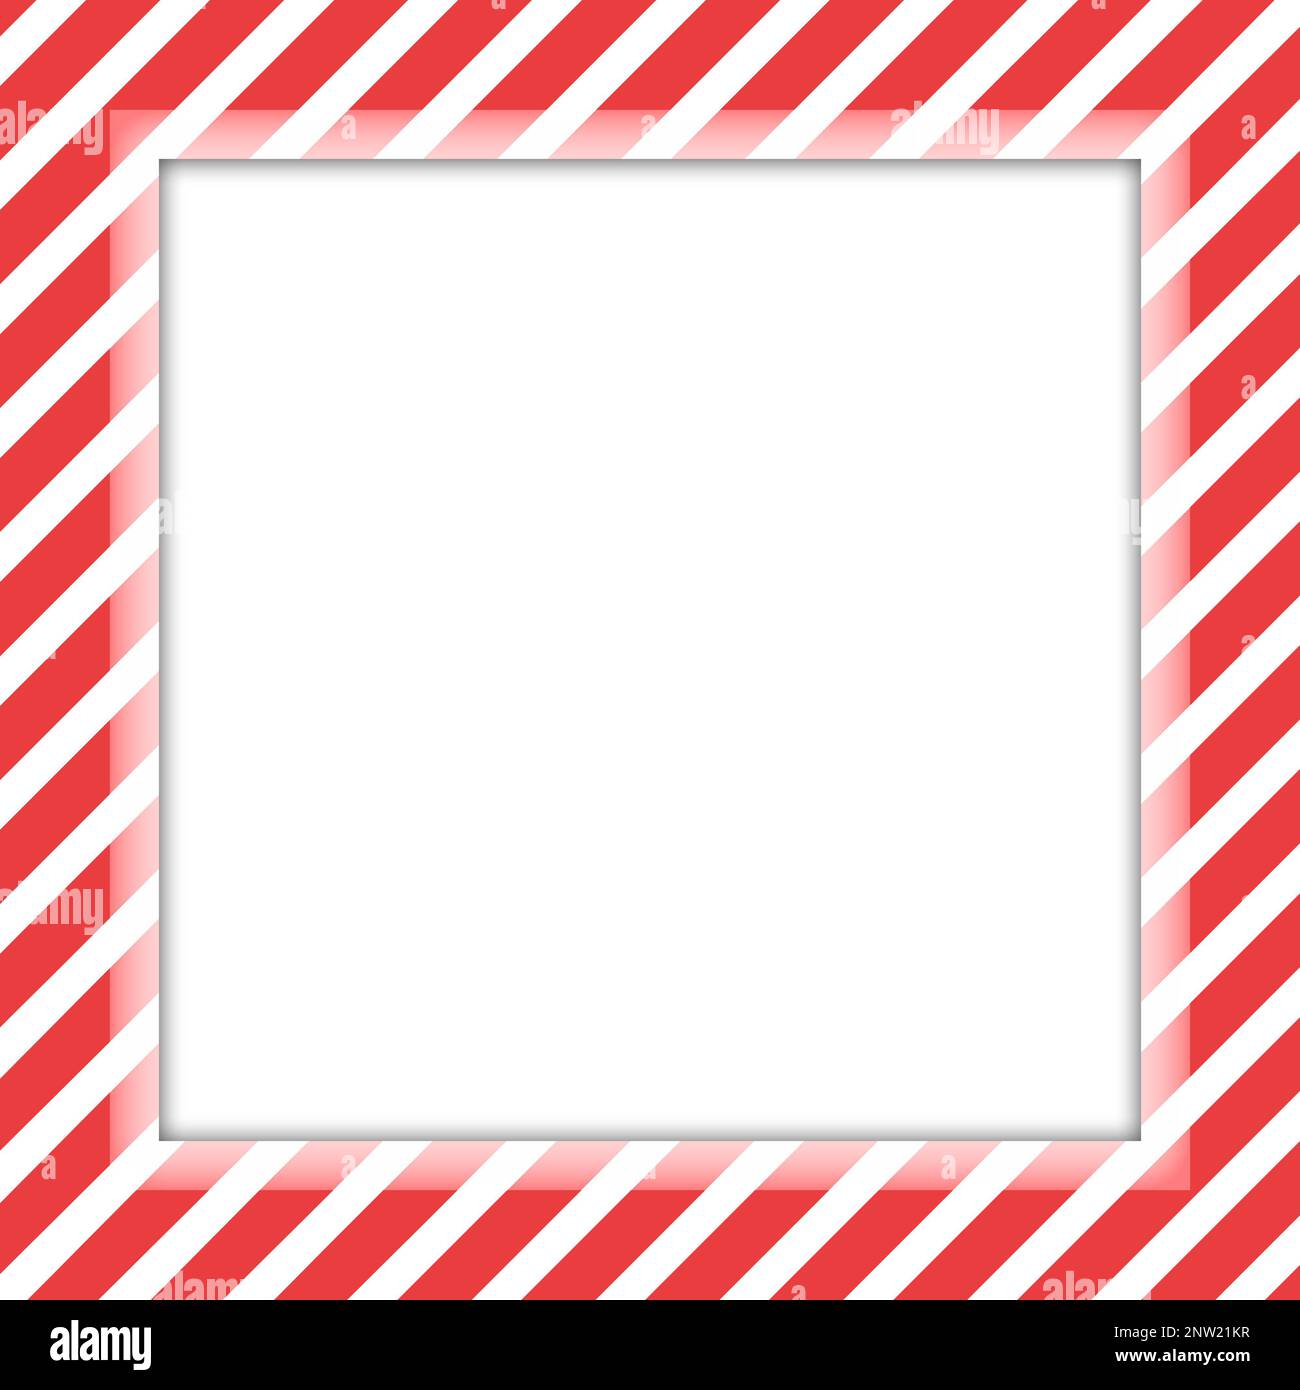 Striped red white border frame with empty space for your text and image ...